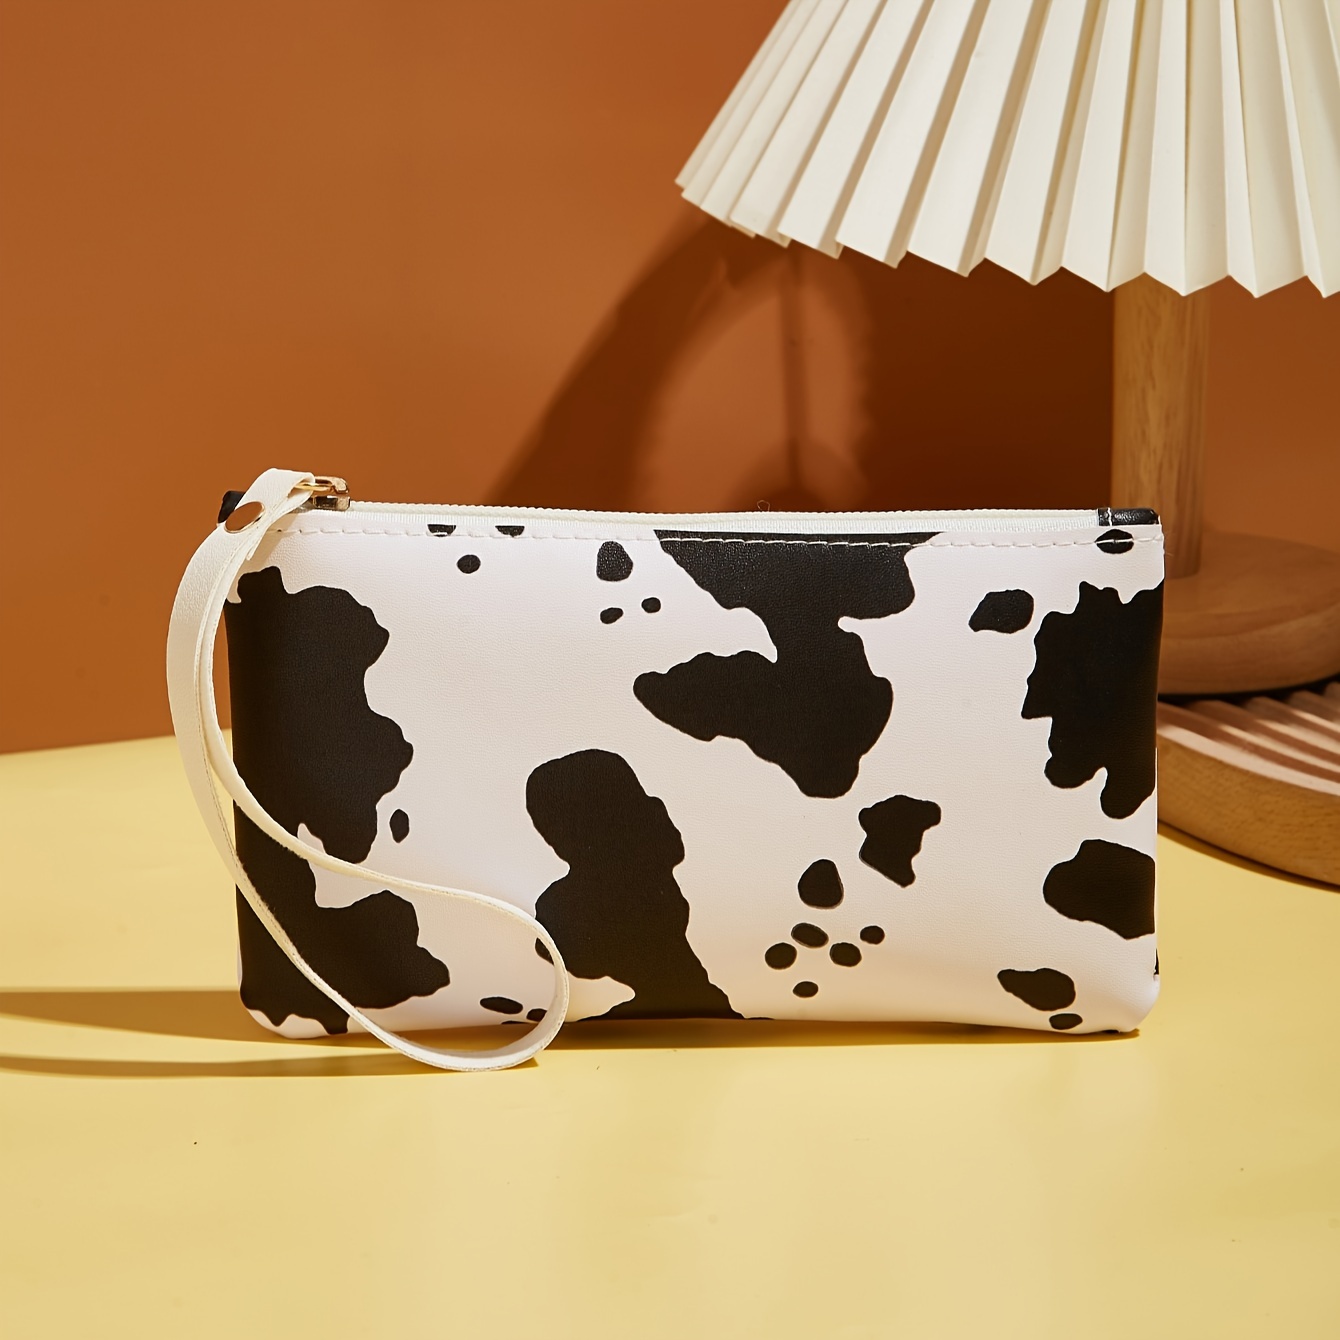 

Chic Cow Print Clutch Wallet For Women, Black And White, Casual Style, 7.48 X 4.35 Inches, Versatile Small Bag With Wrist Strap